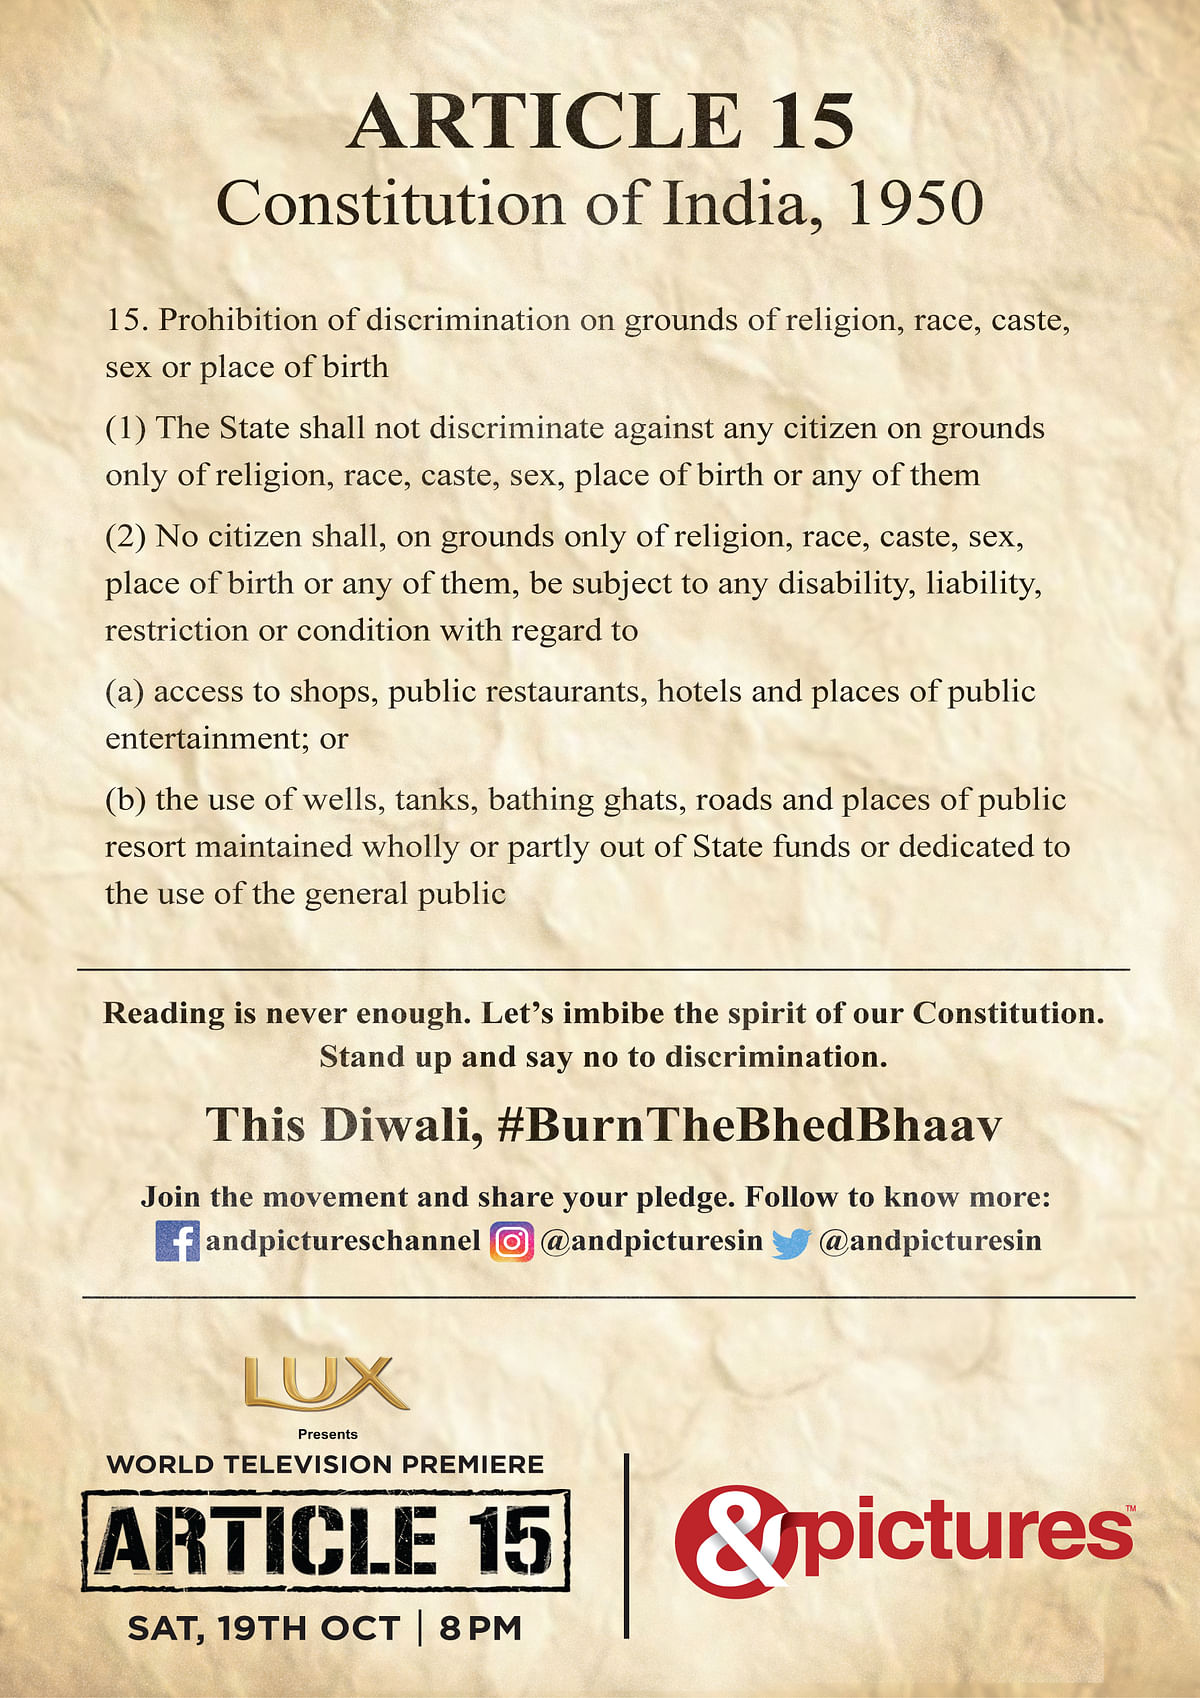 This Diwali #BurnTheBhedBhaav as &pictures urges the nation to stand against discrimination with Article 15 on 19thOctober